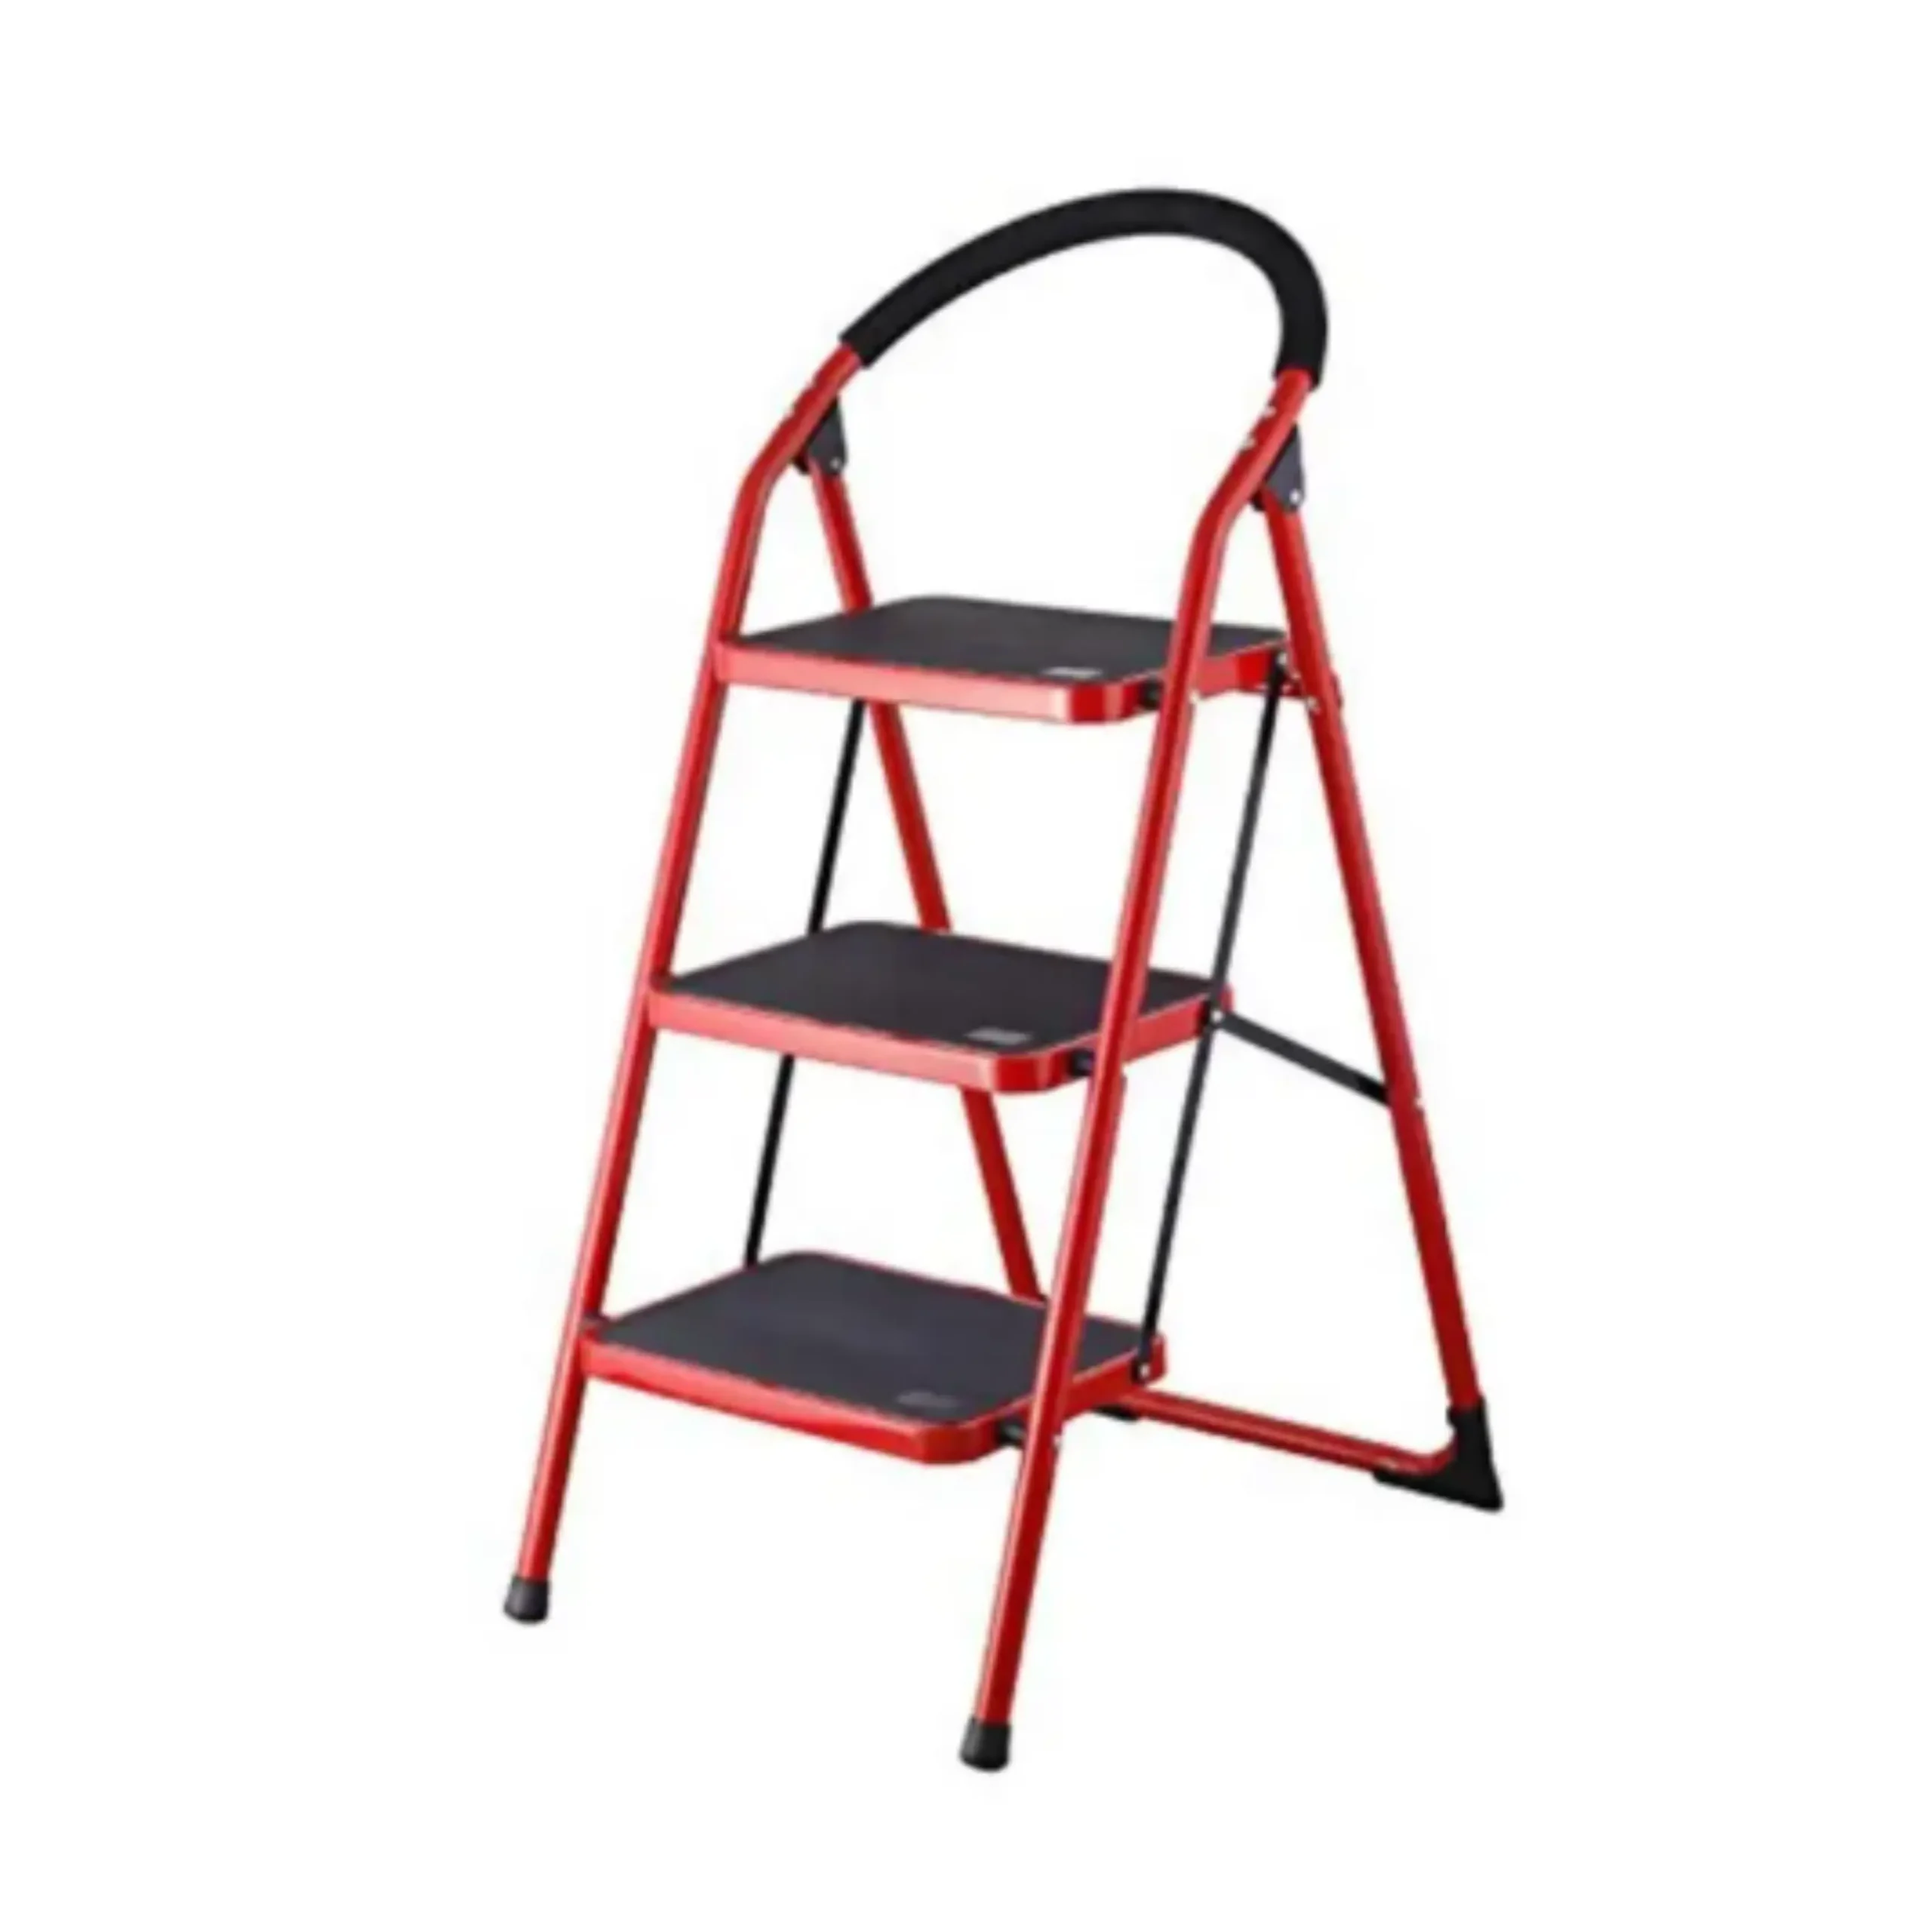 MULTIFUNCTION HOUSEHOLD LADDER, FOLDABLE LADDER WITH SAFETY HOLD HANDLE, STURDY AND DURABLE LADDER